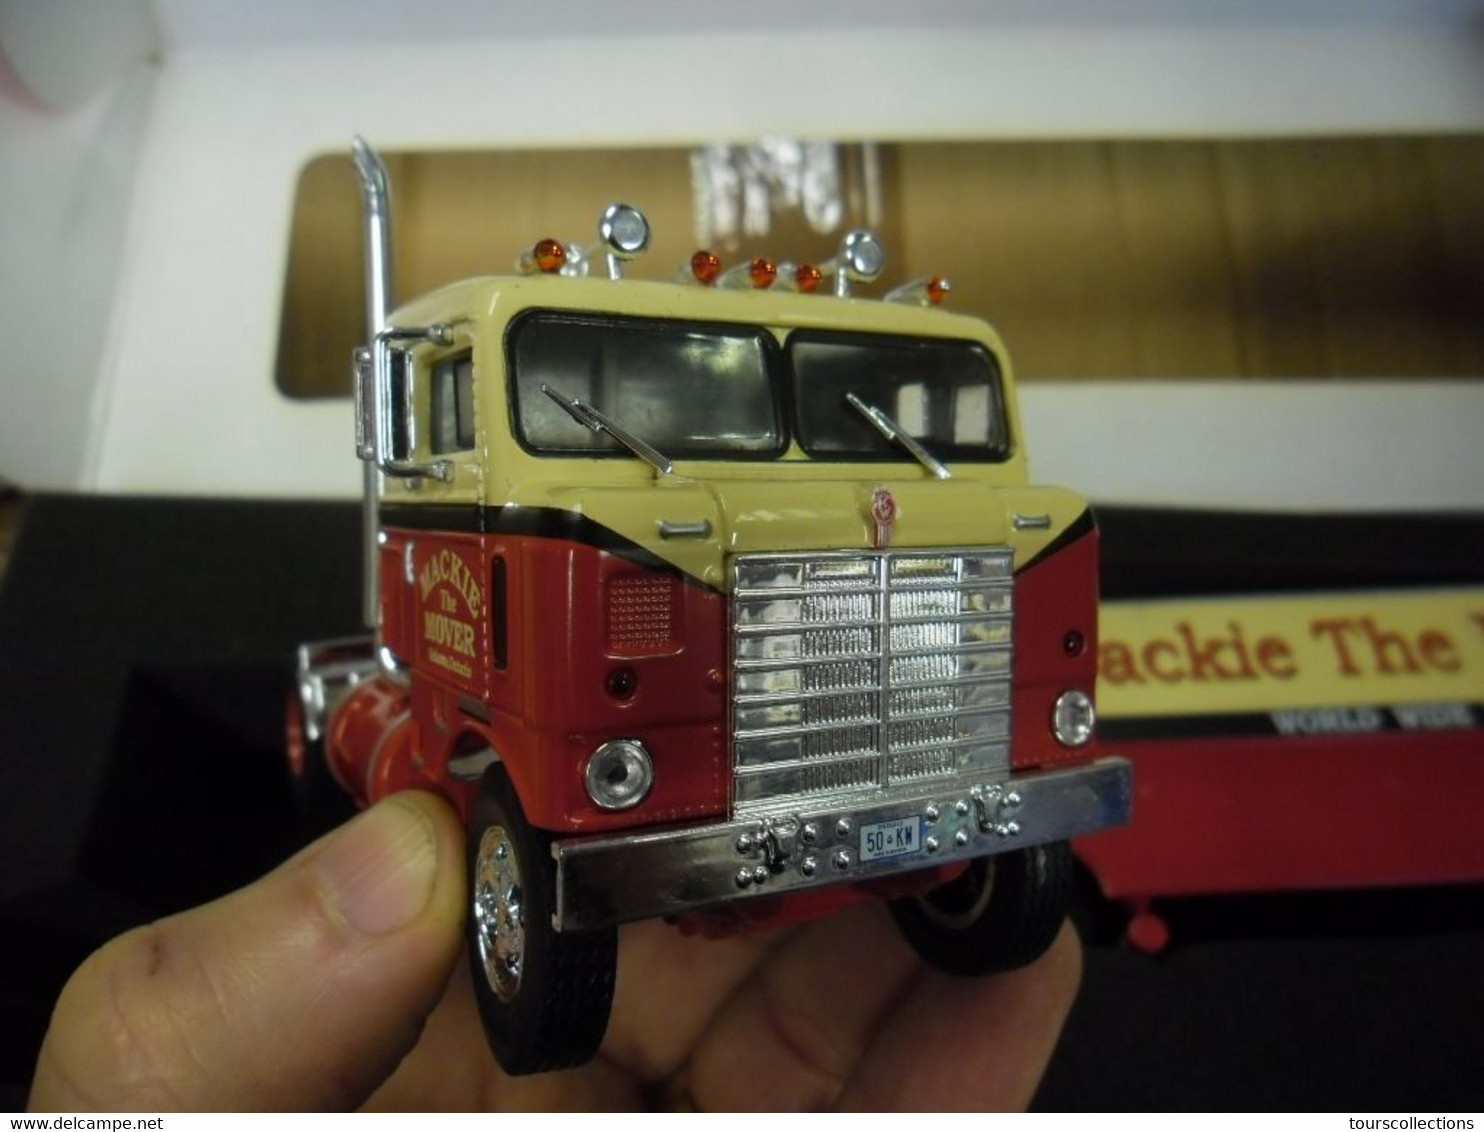 CAMION SEMI REMORQUE TEKNO 1:50 KENWORTH COE BULLNOSE - MACKIE THE MOVER - WORLD WIDE MOVING - Trucks, Buses & Construction